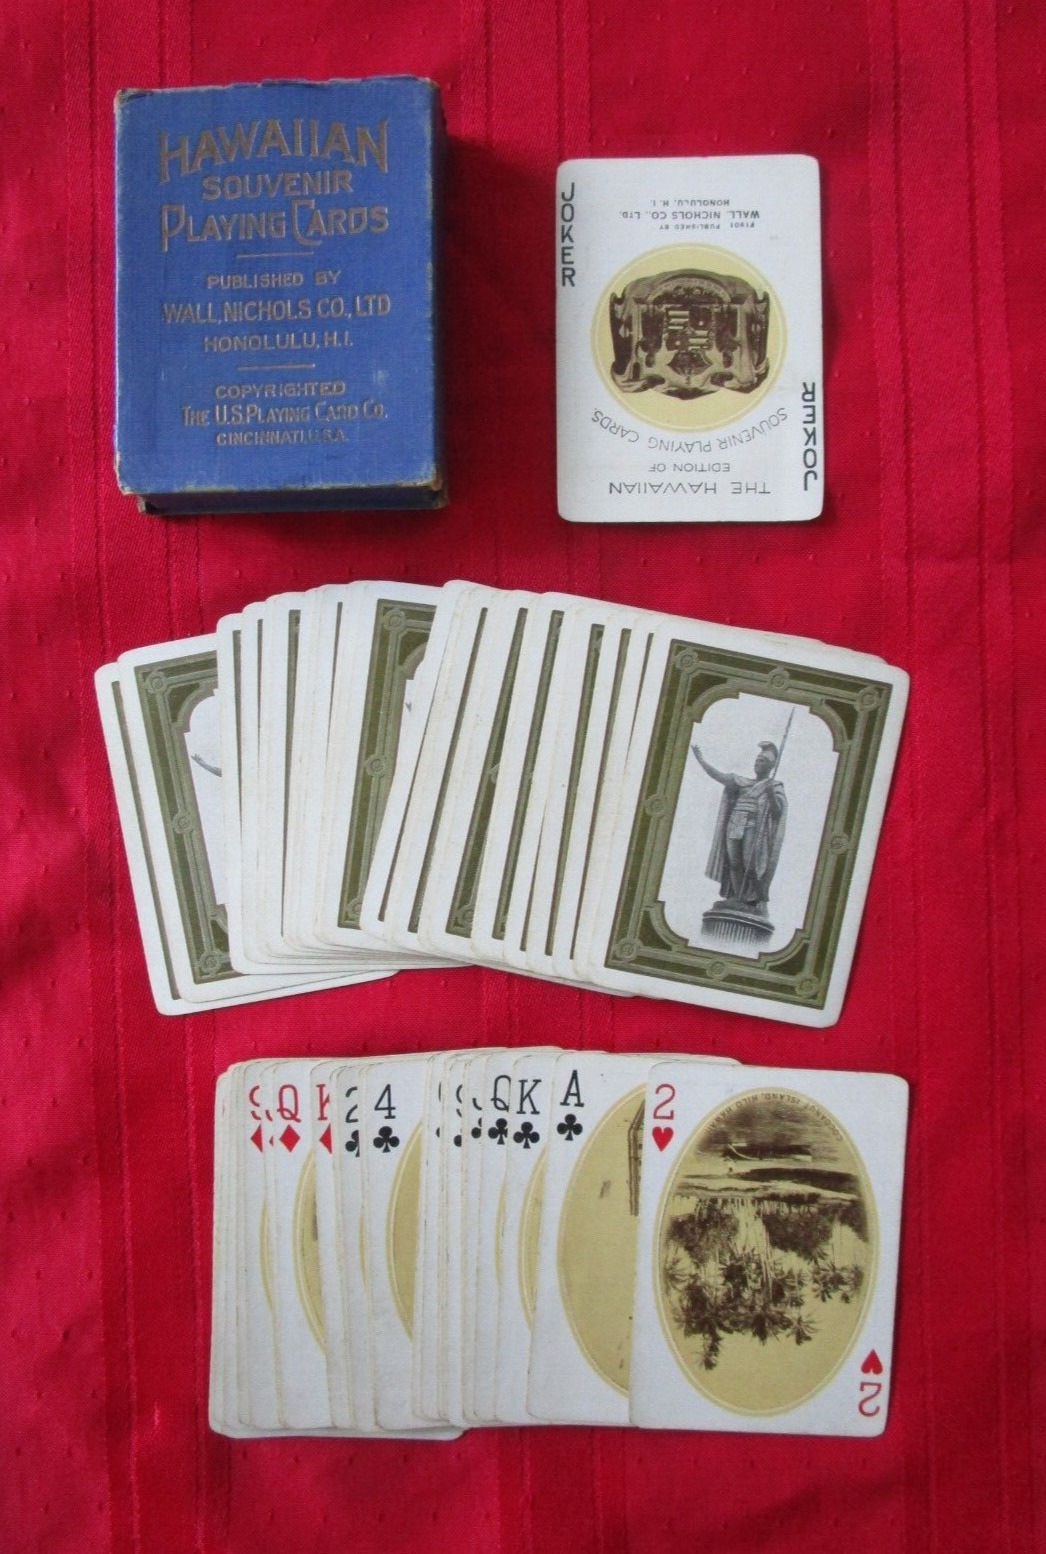 HAWAIIAN SCENIC PLAYING CARD DECK - Early - Complete - 1900